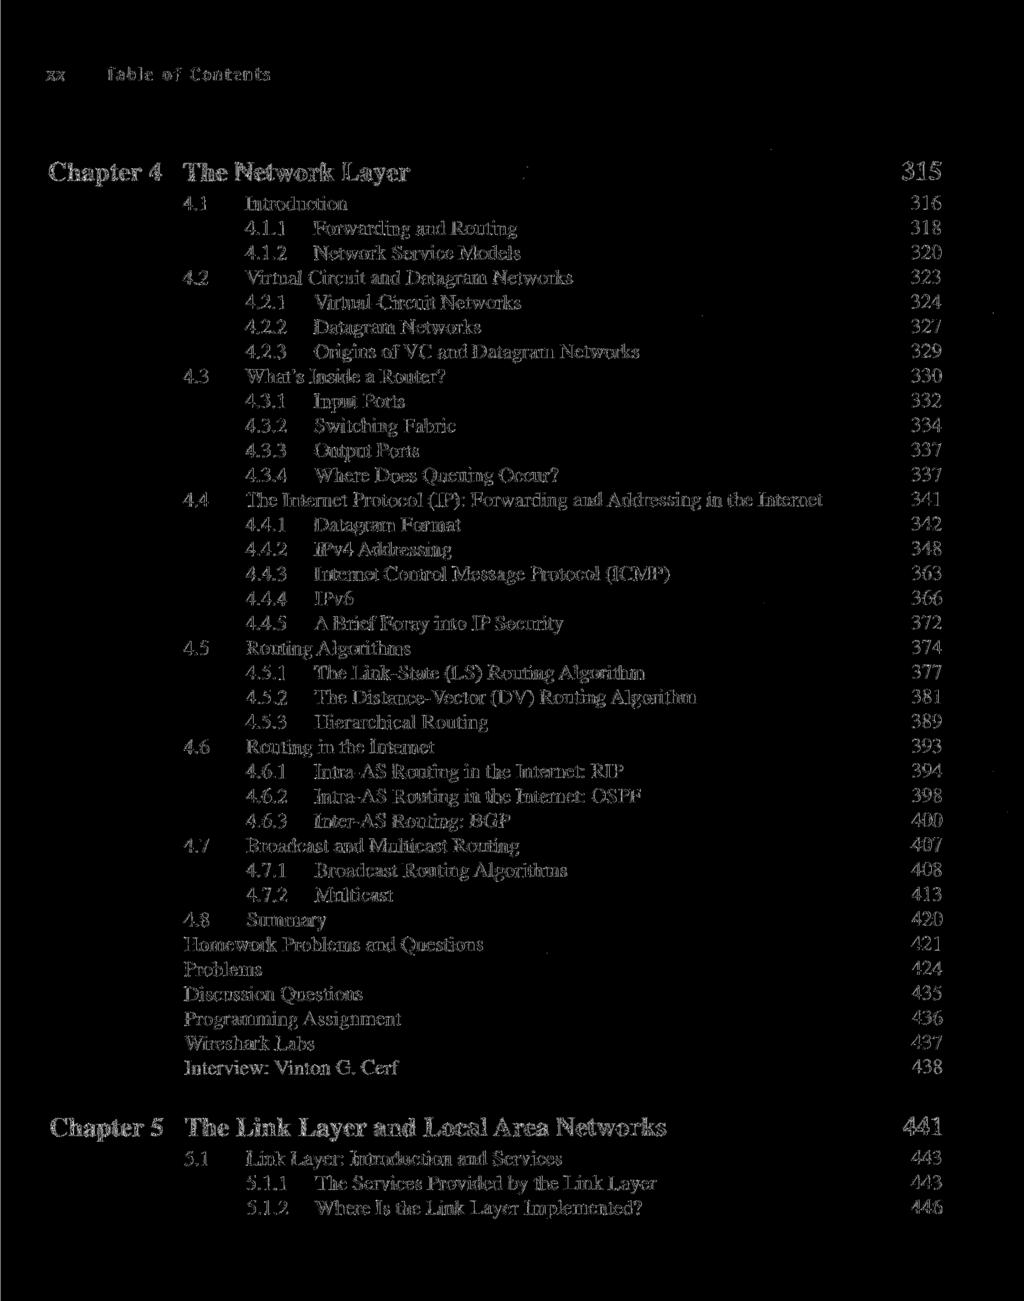 xx Table of Contents Chapter 4 The Network Layer 315 4.1 Introduction 316 4.1.1 Forwarding and Routing 318 4.1.2 Network Service Models 320 4.2 Virtual Circuit and Datagram Networks 323 4.2.1 Virtual-Circuit Networks 324 4.